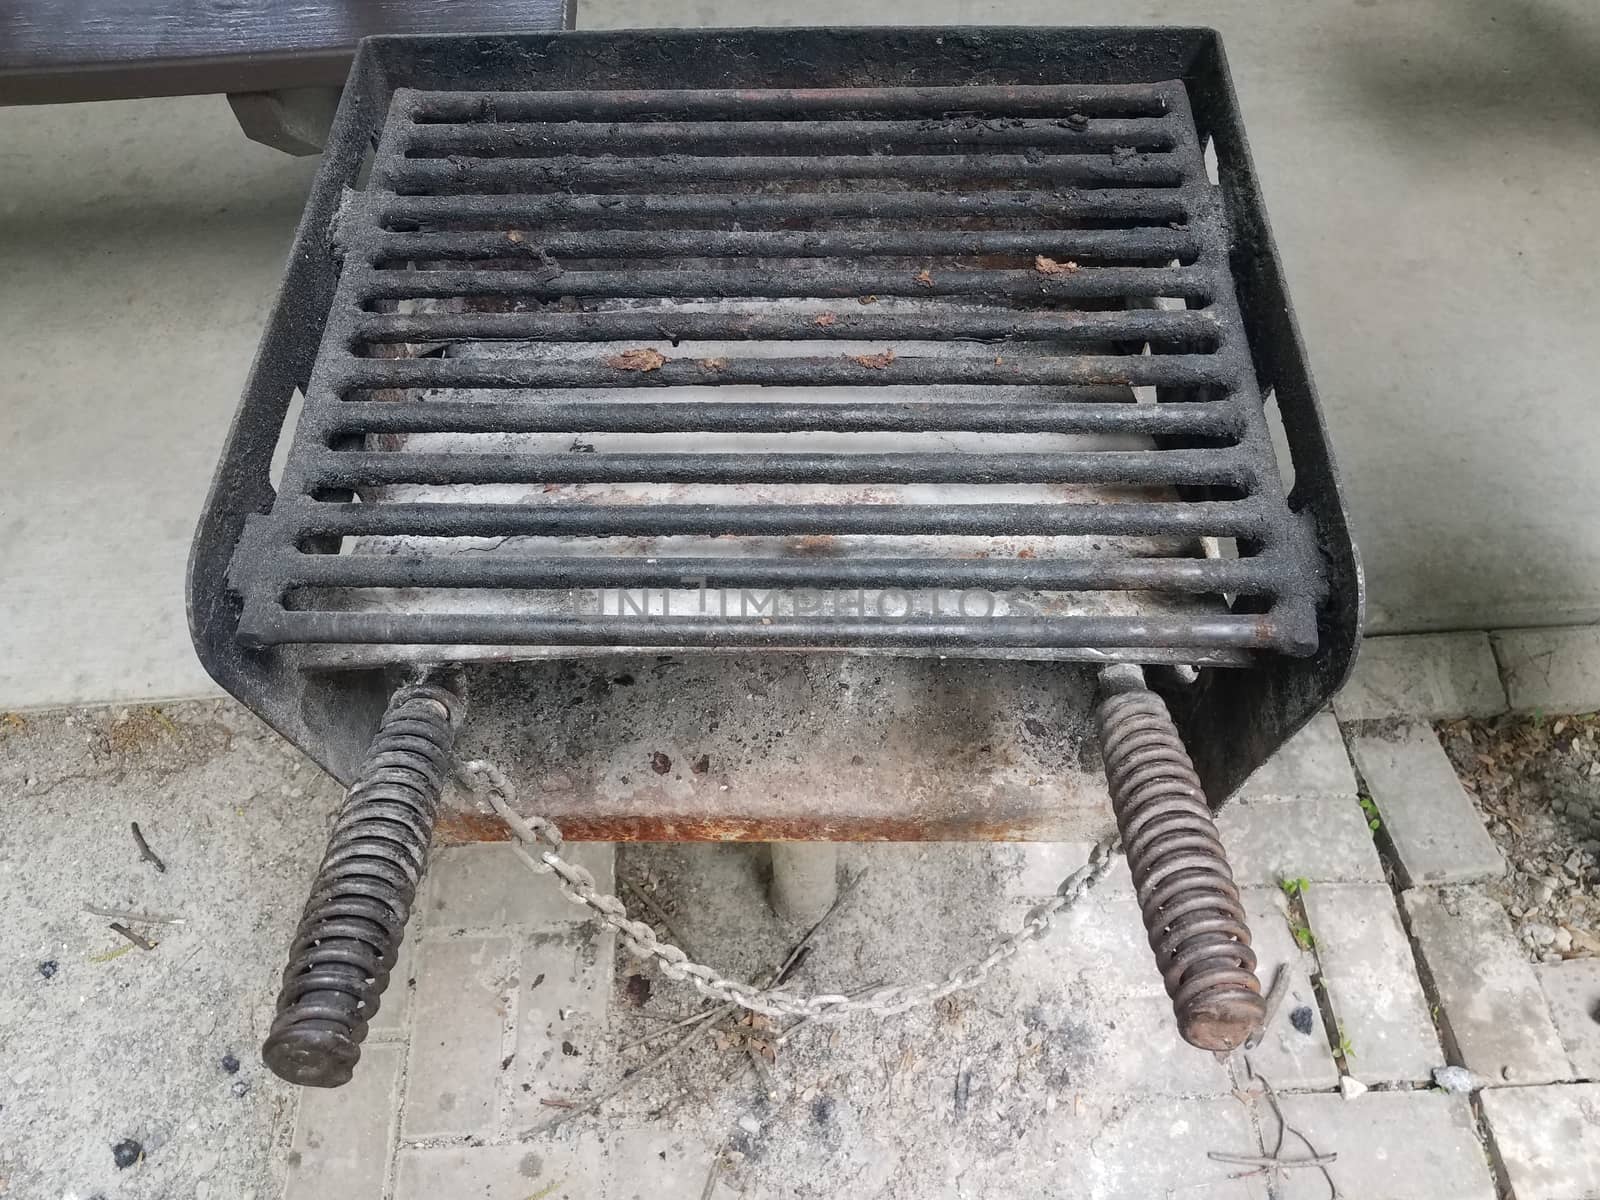 dirty or filthy barbecue grill metal bars with charcoal ash